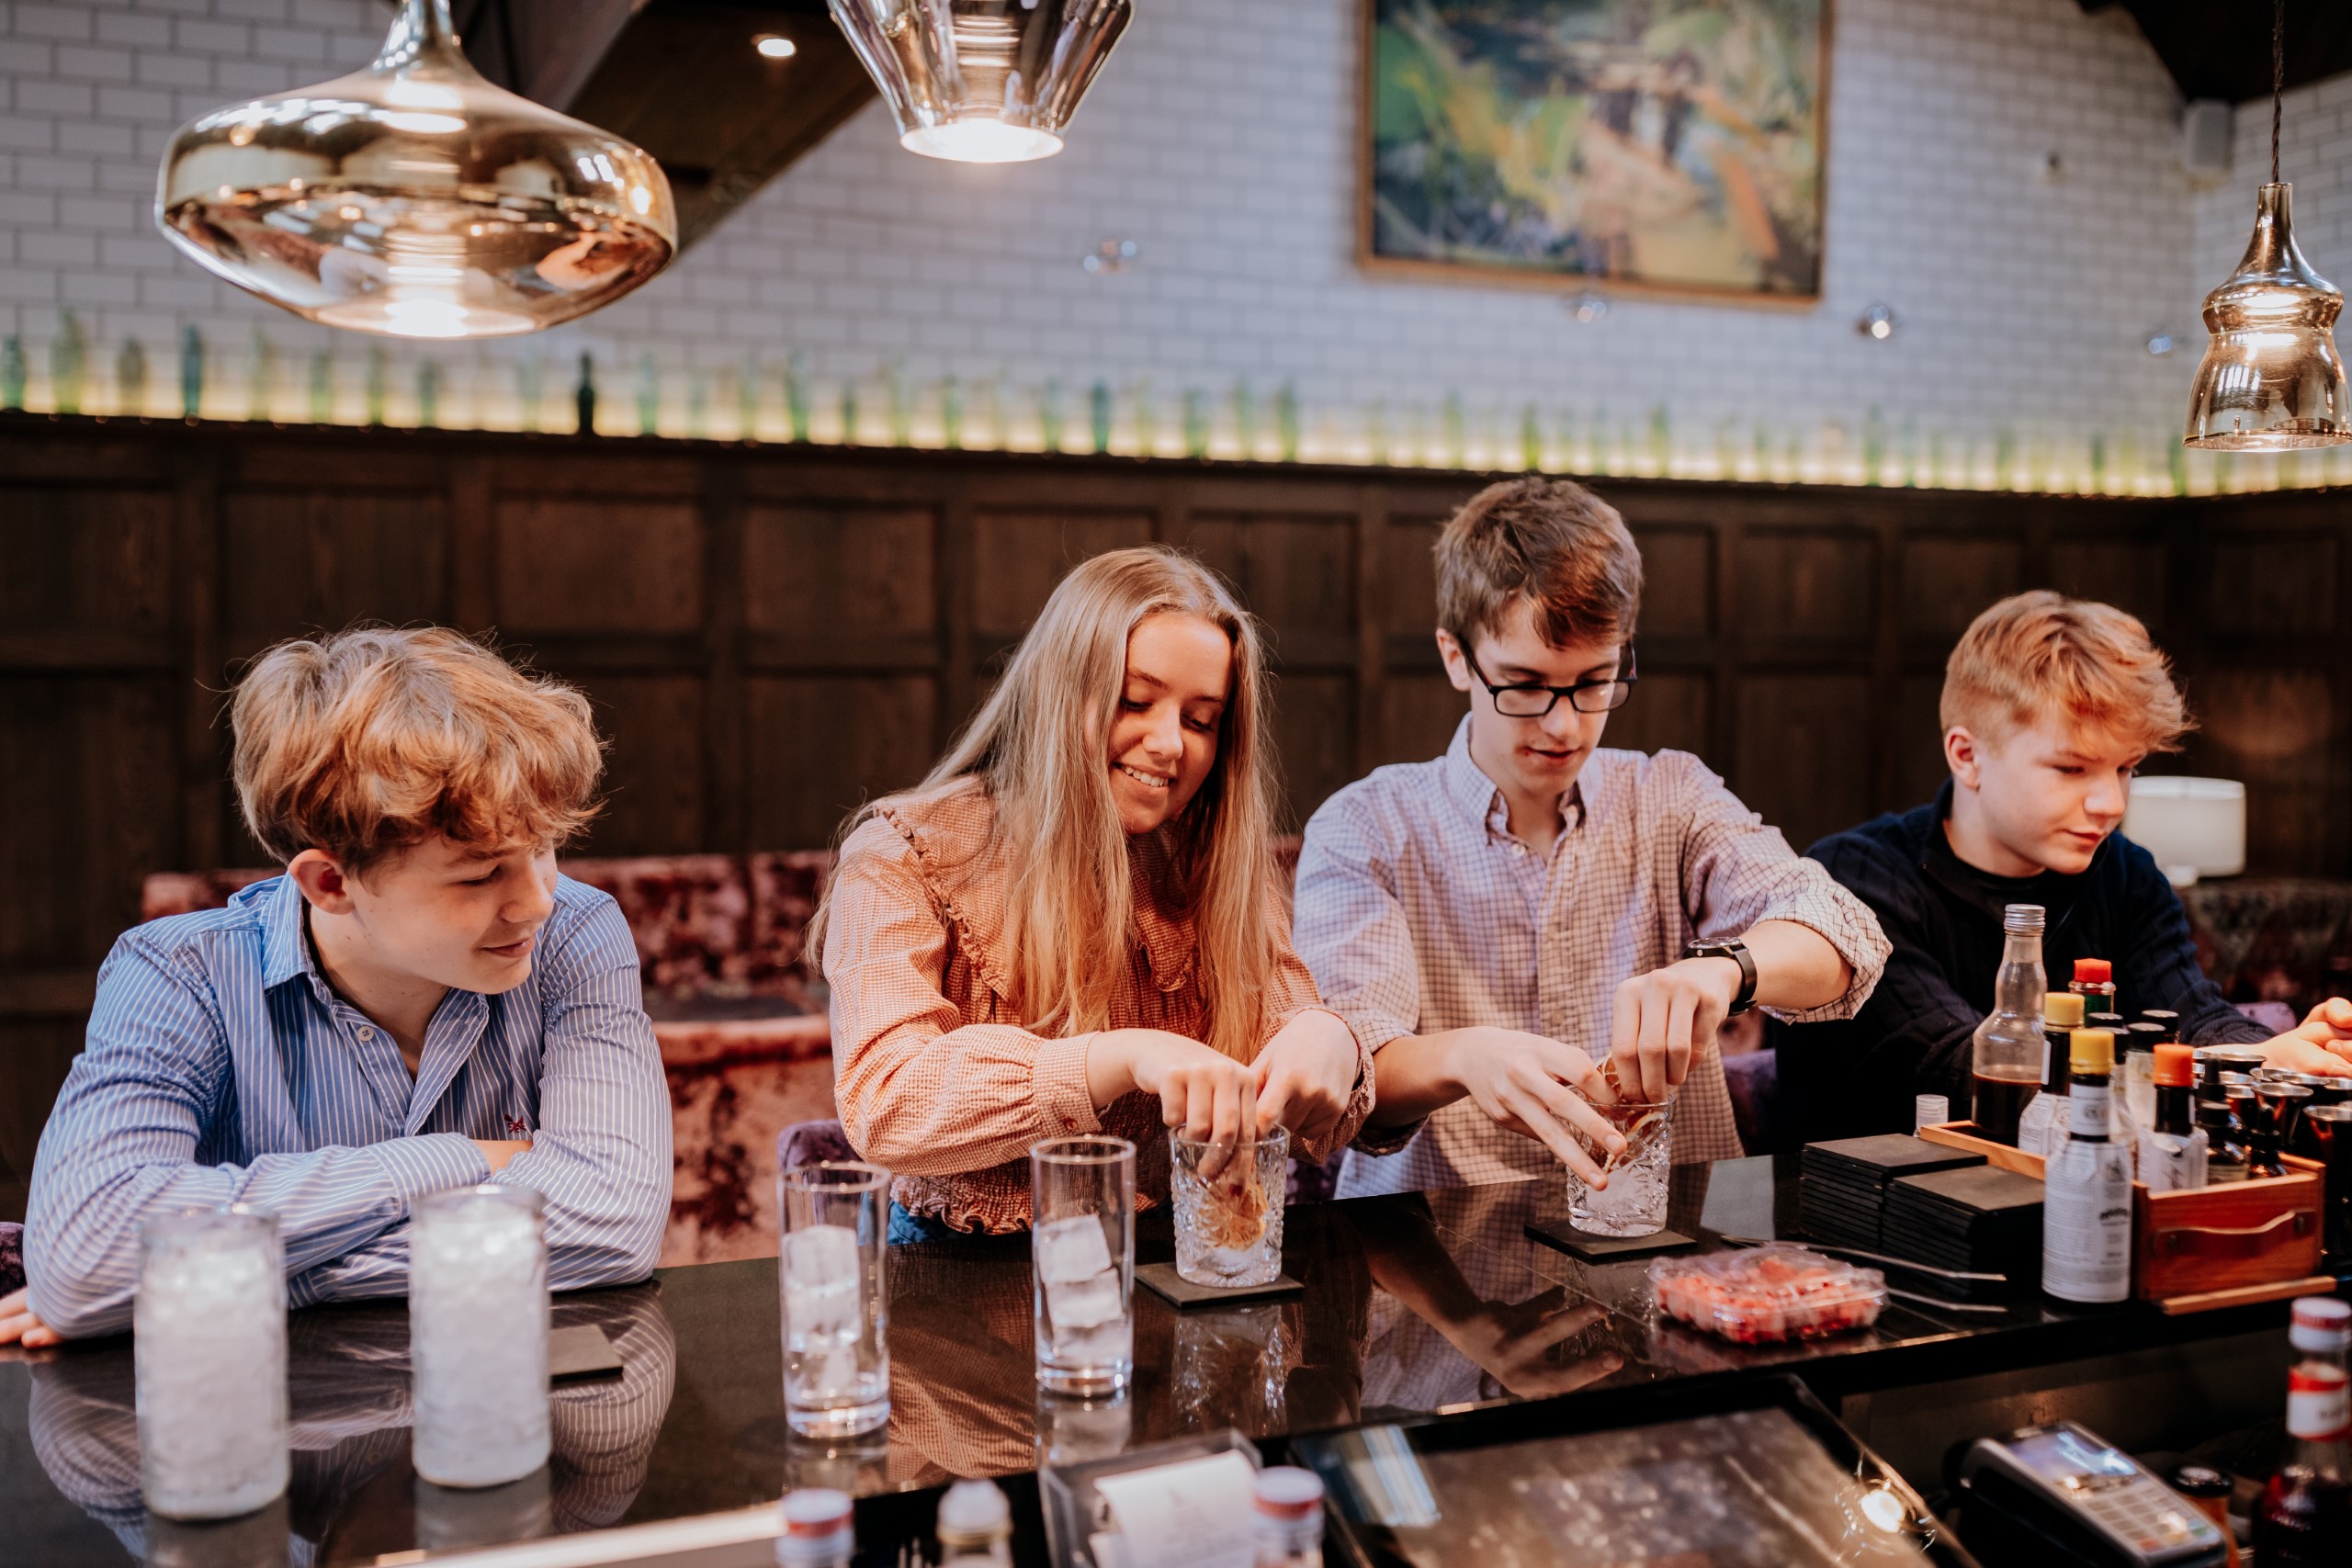 Teenagers making mocktails during a course at The Terrace Restaurant and Bar on the Swinton Estate in North Yorkshire.